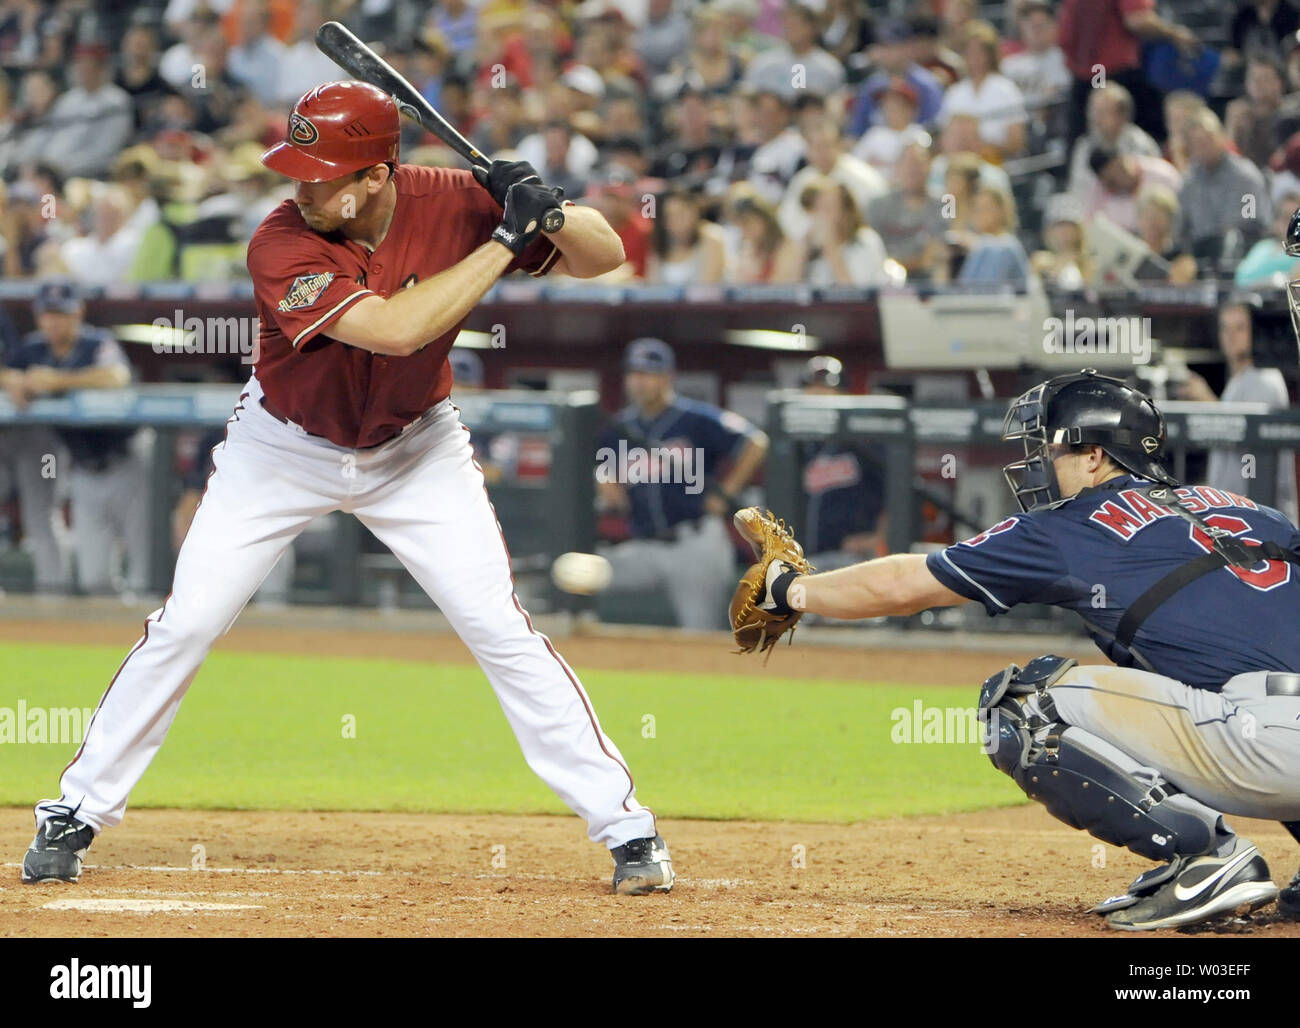 Arizona Diamondbacks starting pitcher Zach Duke (L) can't pull the trigger and takes a called third strike in the third inning against the Cleveland Indians at Chase Field in Phoenix, AZ, June 29,2011.  Catching for the Indians is Lou Marson (R).  UPI/Art Foxall Stock Photo